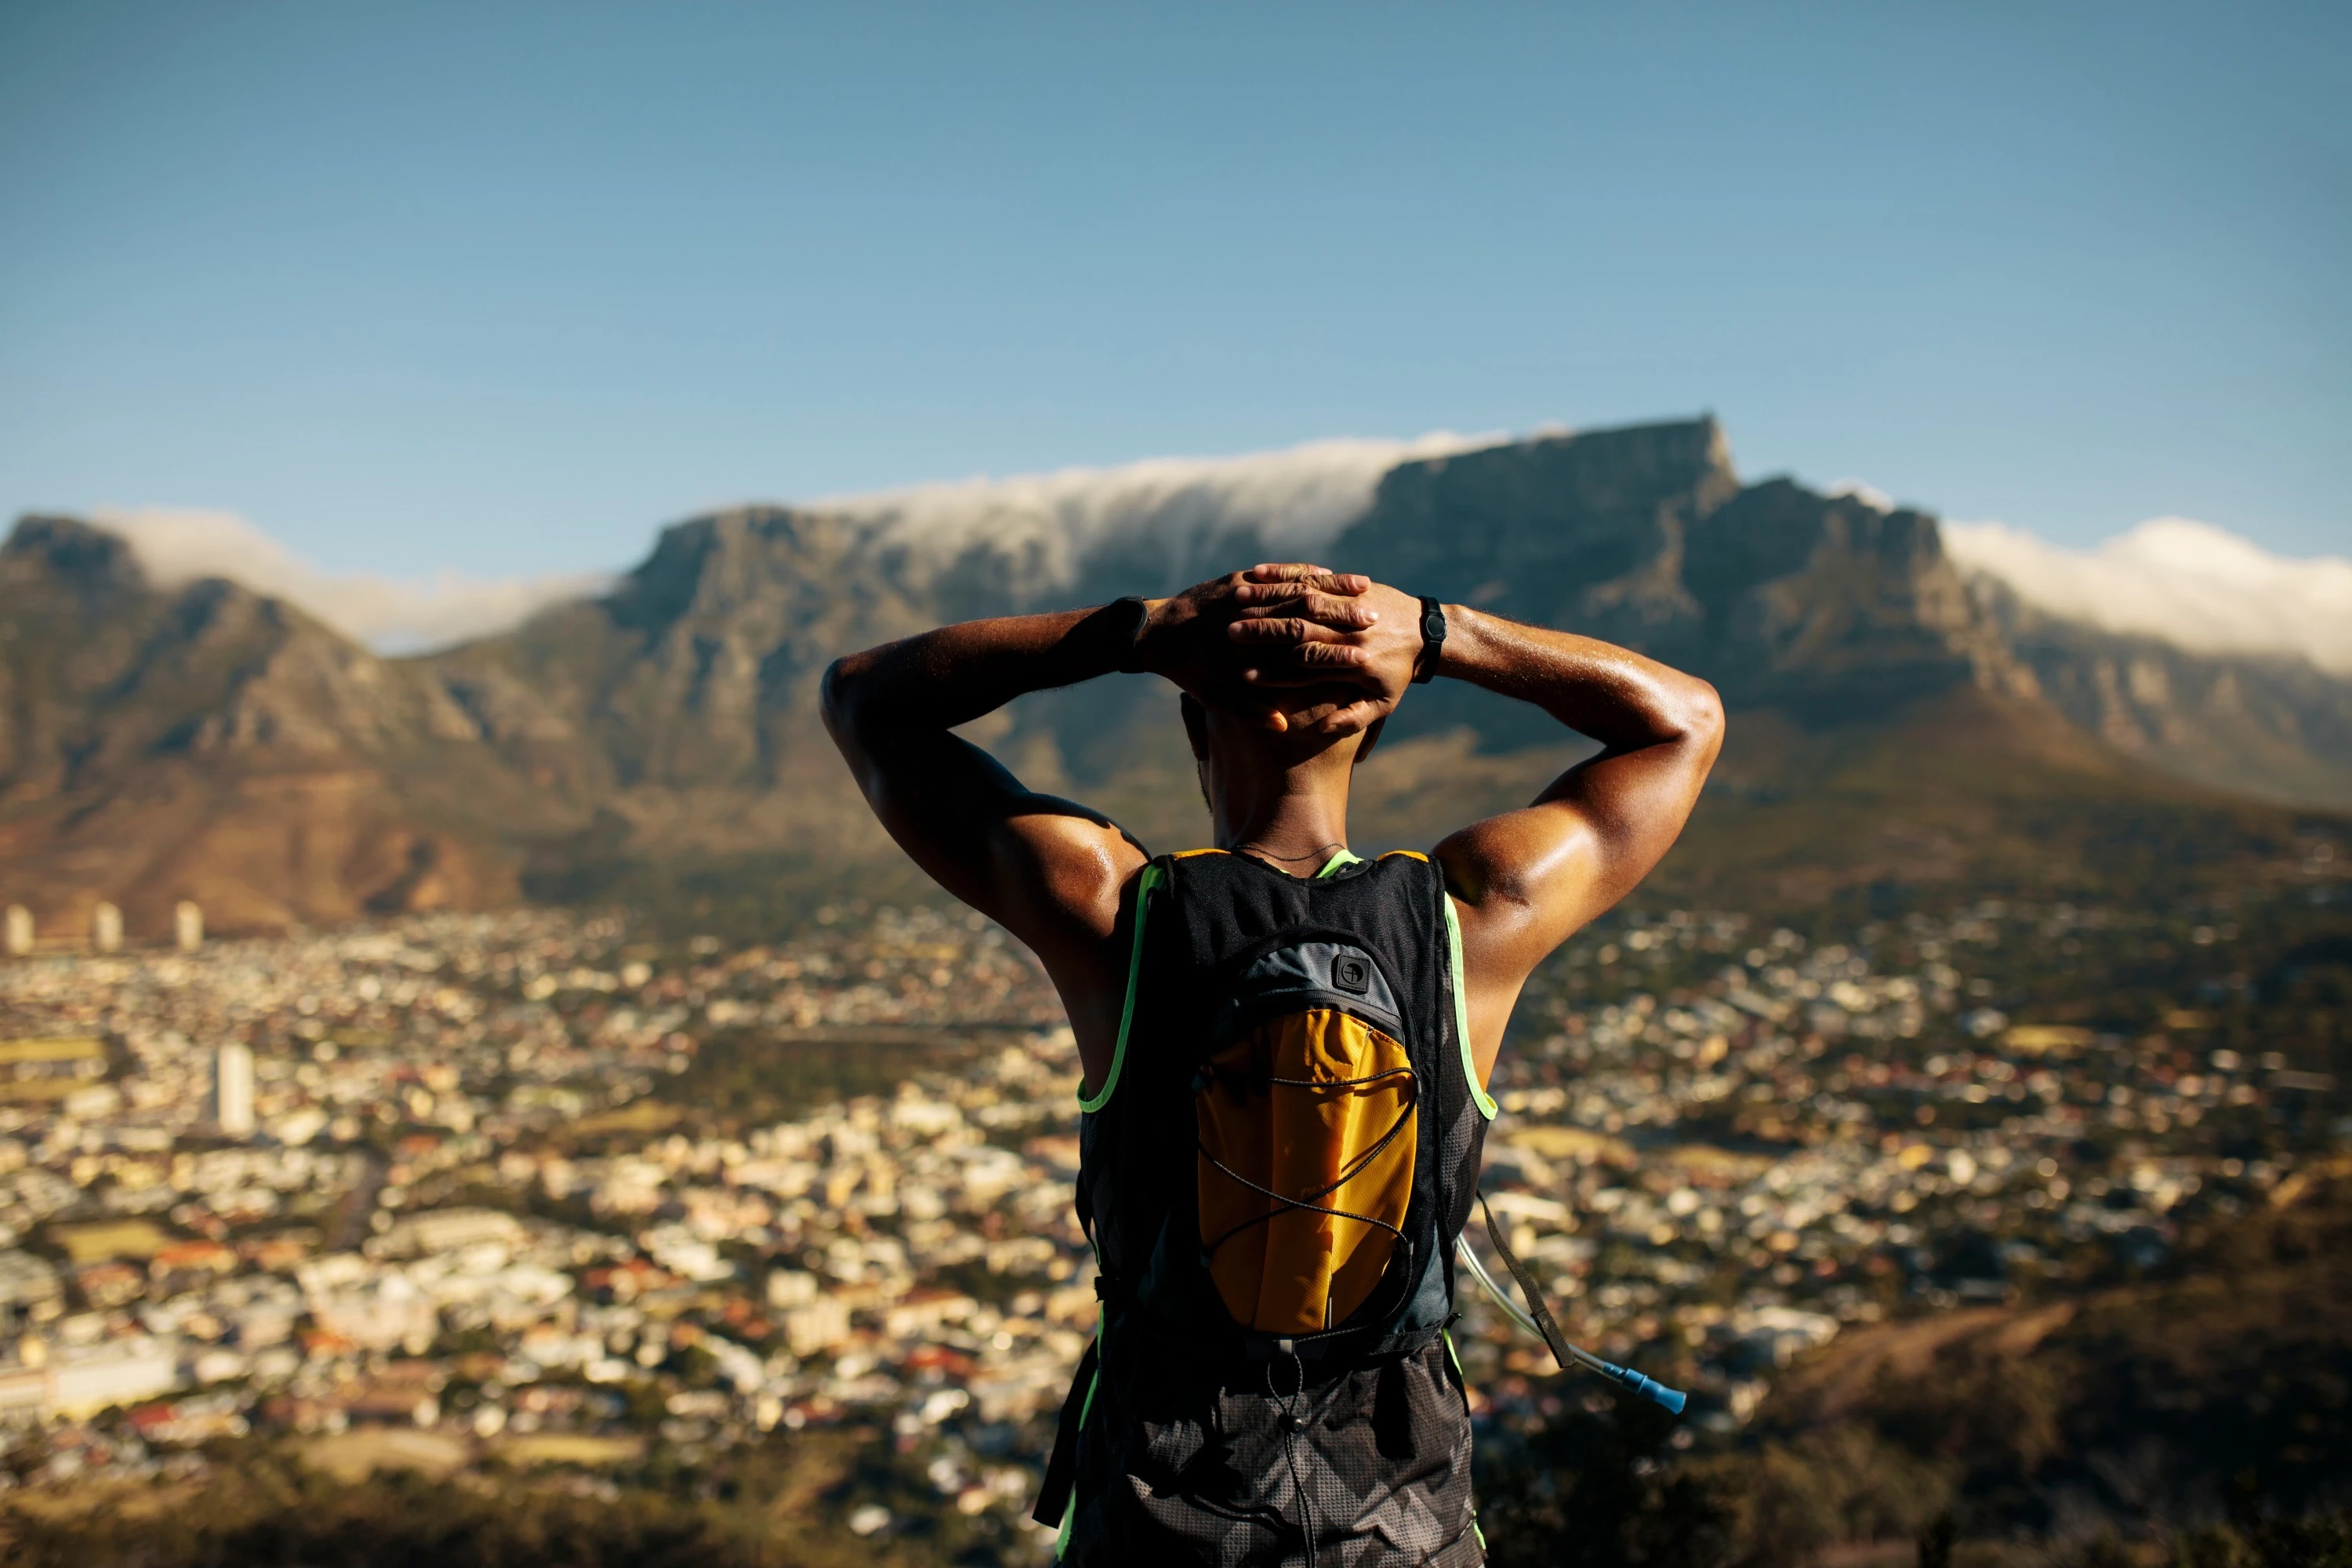 South Africa's Adventure Capitals: Where to Live for Outdoor Sports Enthusiasts